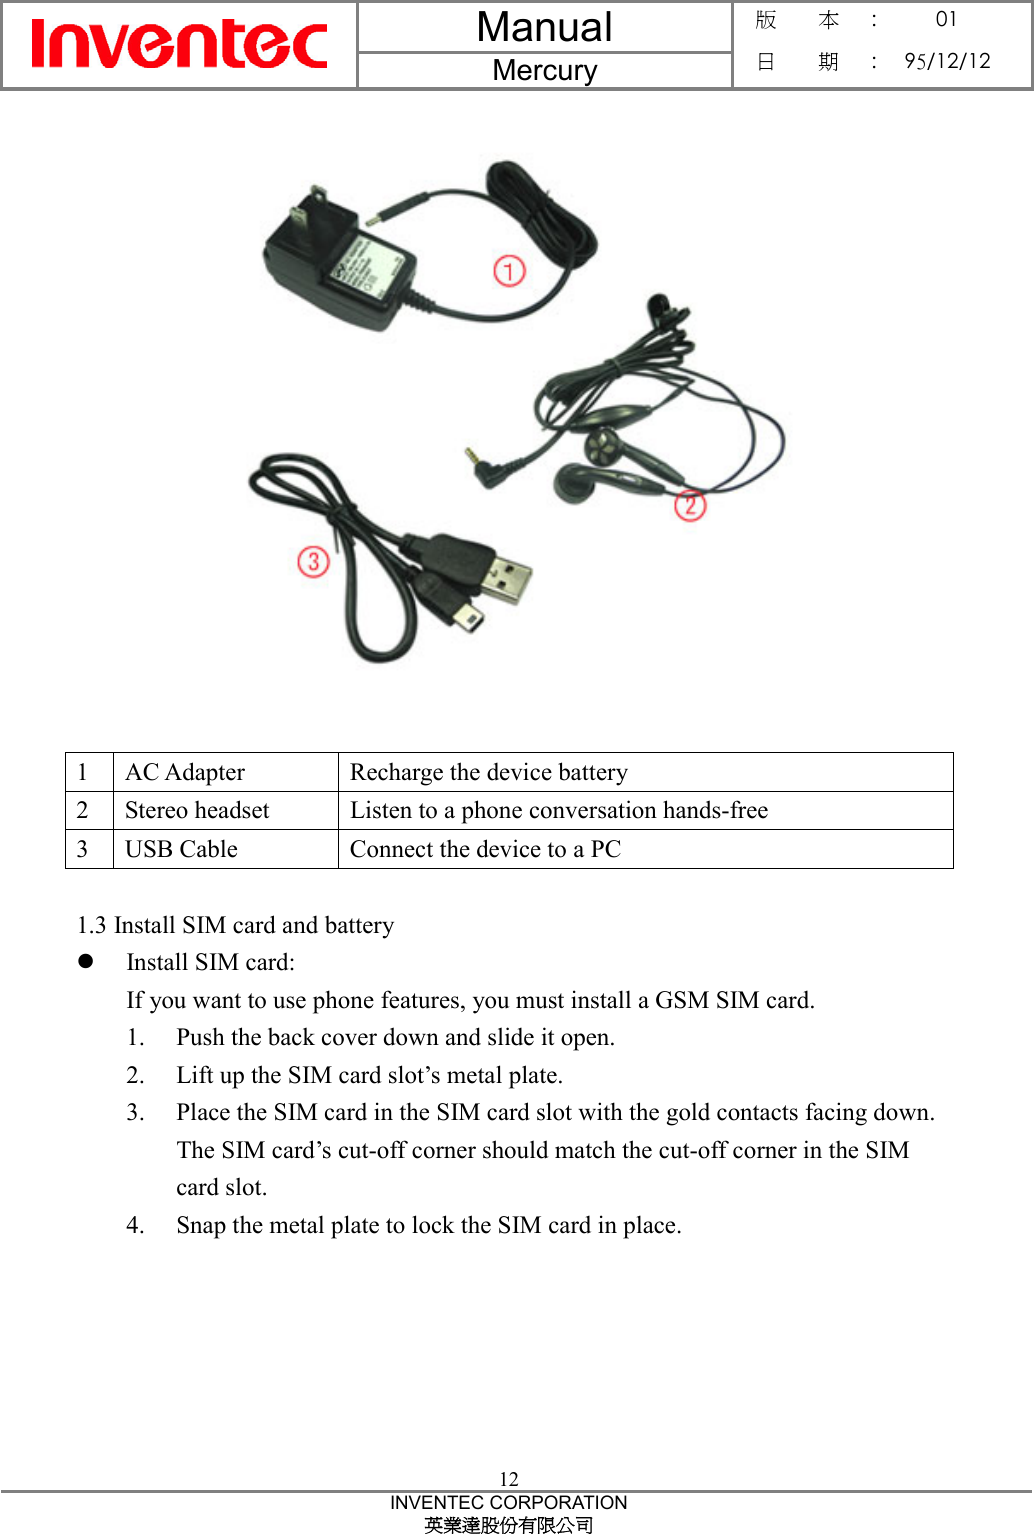 Manual  Mercury 版    本 :  01 日    期 : 95/12/12  12 INVENTEC CORPORATION 英業達股份有限公司    1  AC Adapter  Recharge the device battery 2  Stereo headset  Listen to a phone conversation hands-free 3 USB Cable  Connect the device to a PC  1.3 Install SIM card and battery z Install SIM card: If you want to use phone features, you must install a GSM SIM card. 1. Push the back cover down and slide it open. 2. Lift up the SIM card slot’s metal plate. 3. Place the SIM card in the SIM card slot with the gold contacts facing down. The SIM card’s cut-off corner should match the cut-off corner in the SIM card slot. 4. Snap the metal plate to lock the SIM card in place.  